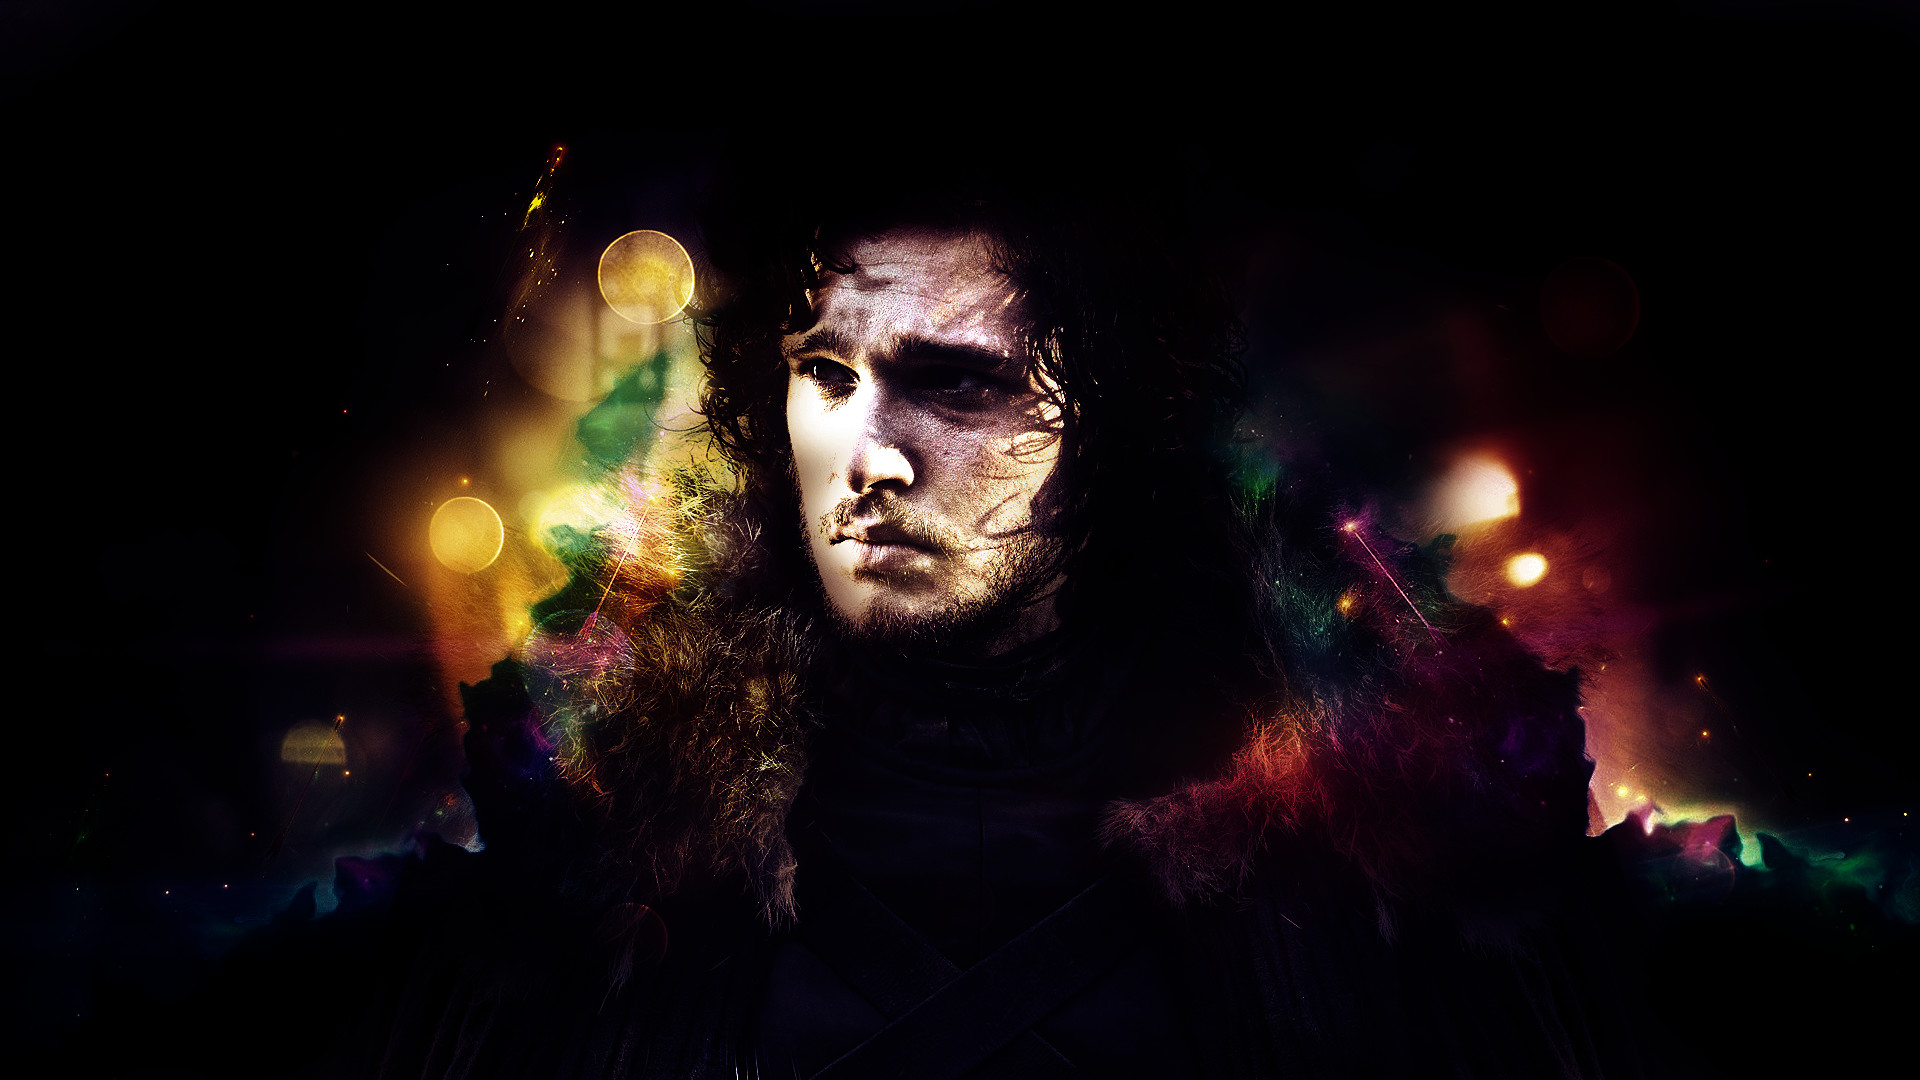 1920x1080 Jon Snow - Game of Thrones by Freedom4Arts